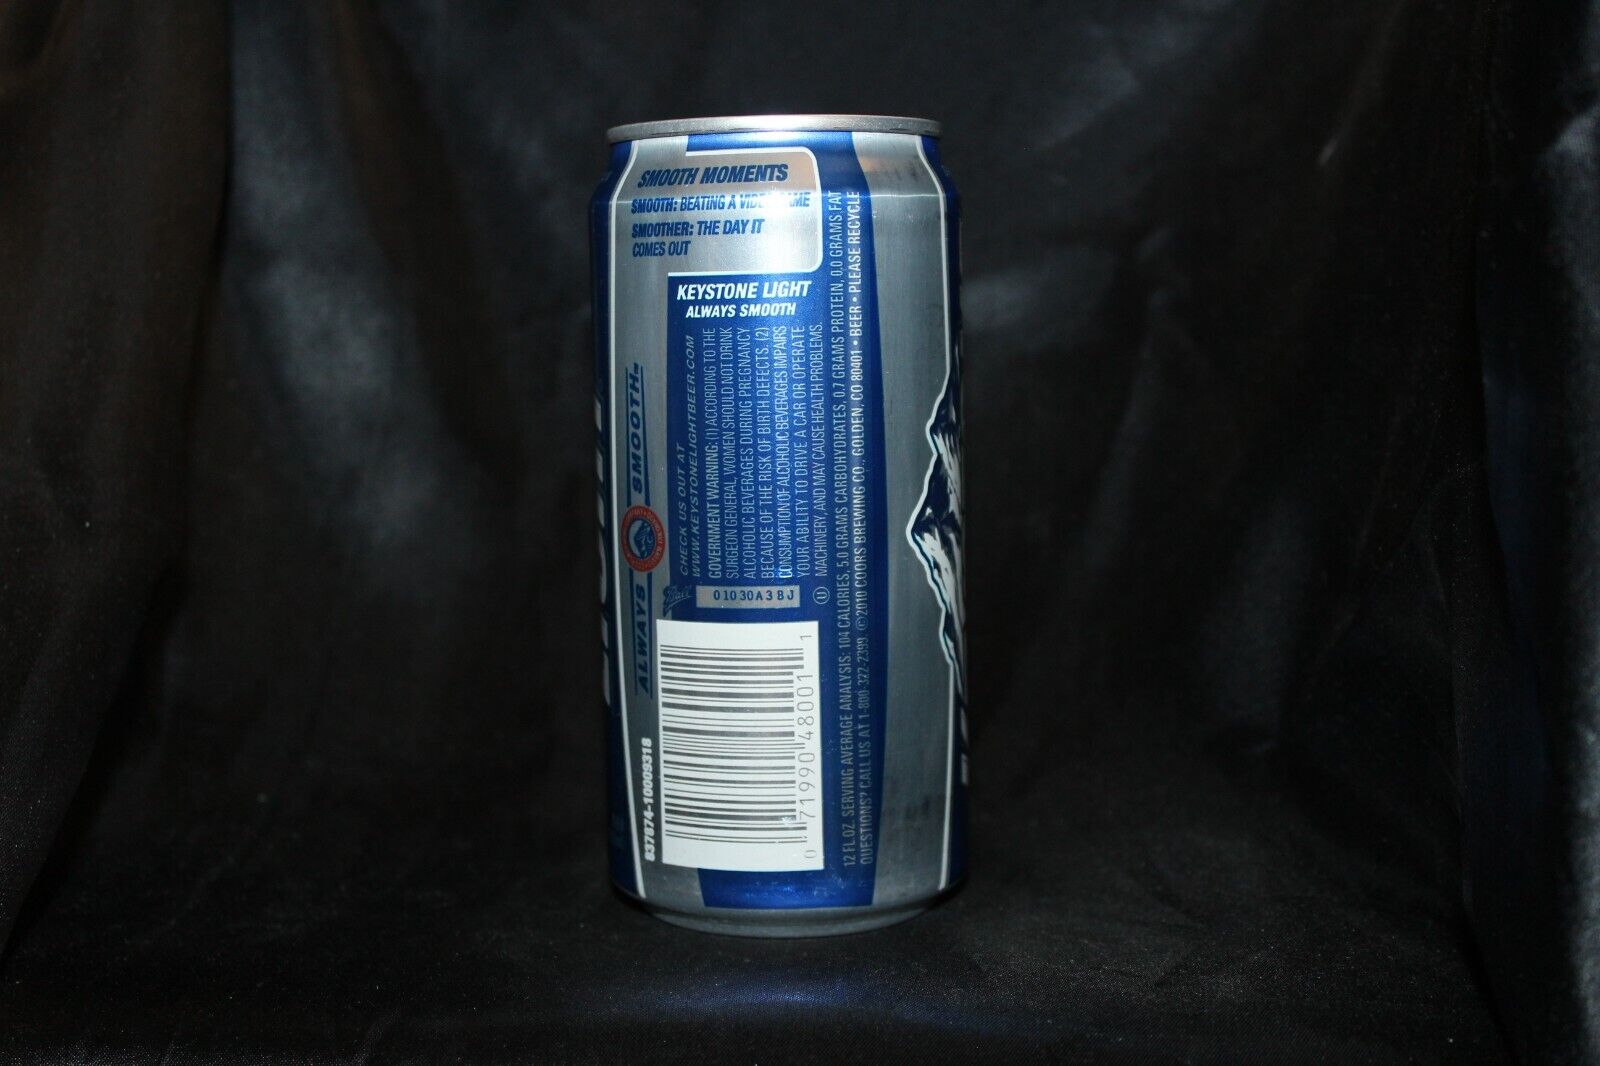 Colorado 12oz - KEYSTONE LIGHT - Smooth Moment - 2010 - BEATING A VIDEO GAME (TH